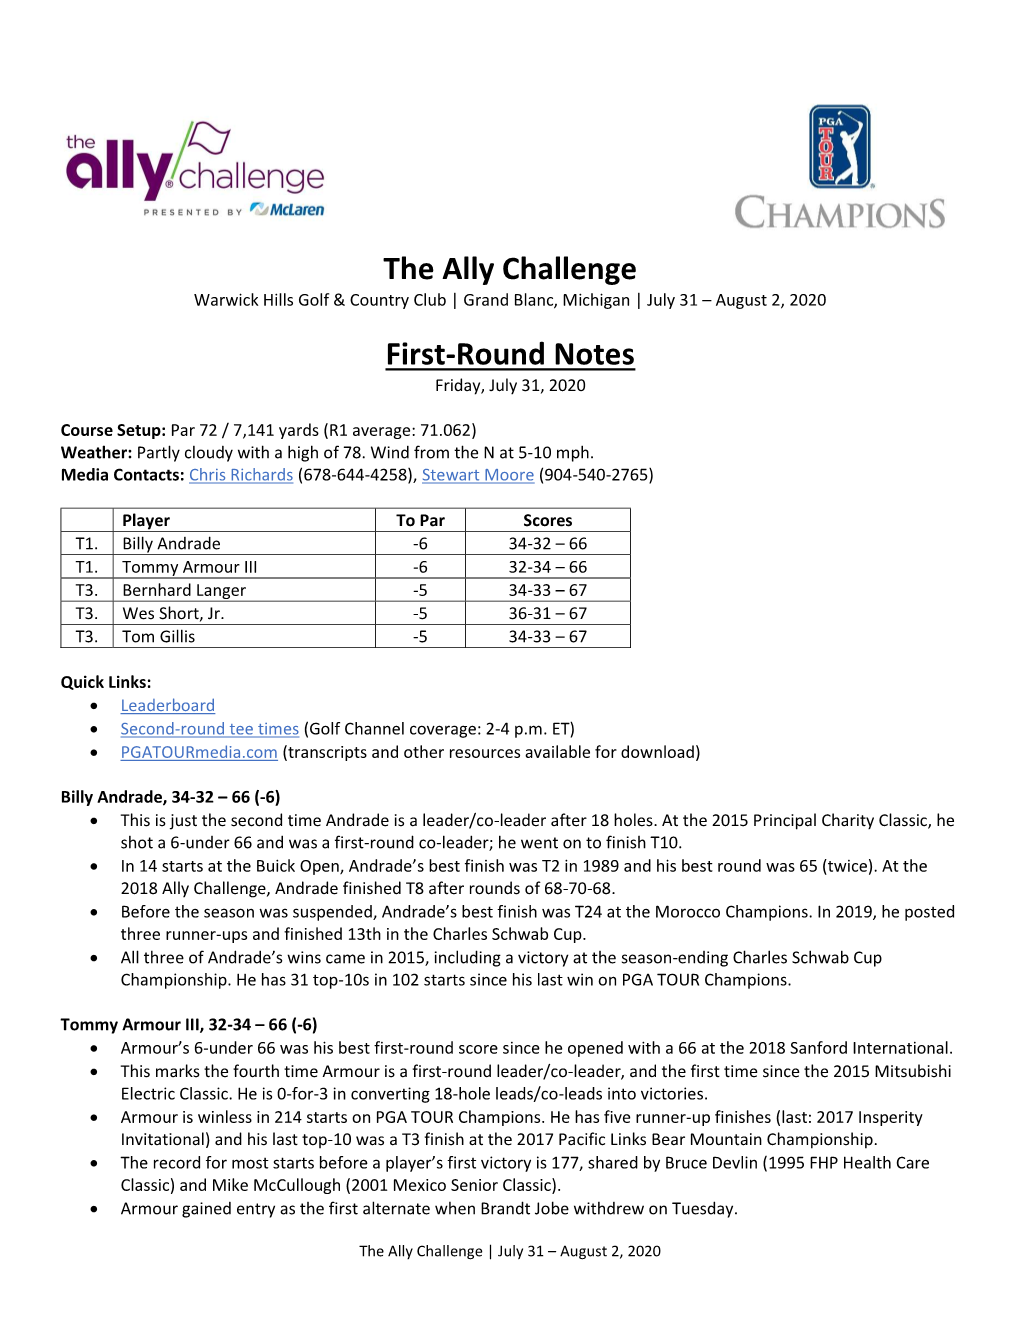 The Ally Challenge First-Round Notes